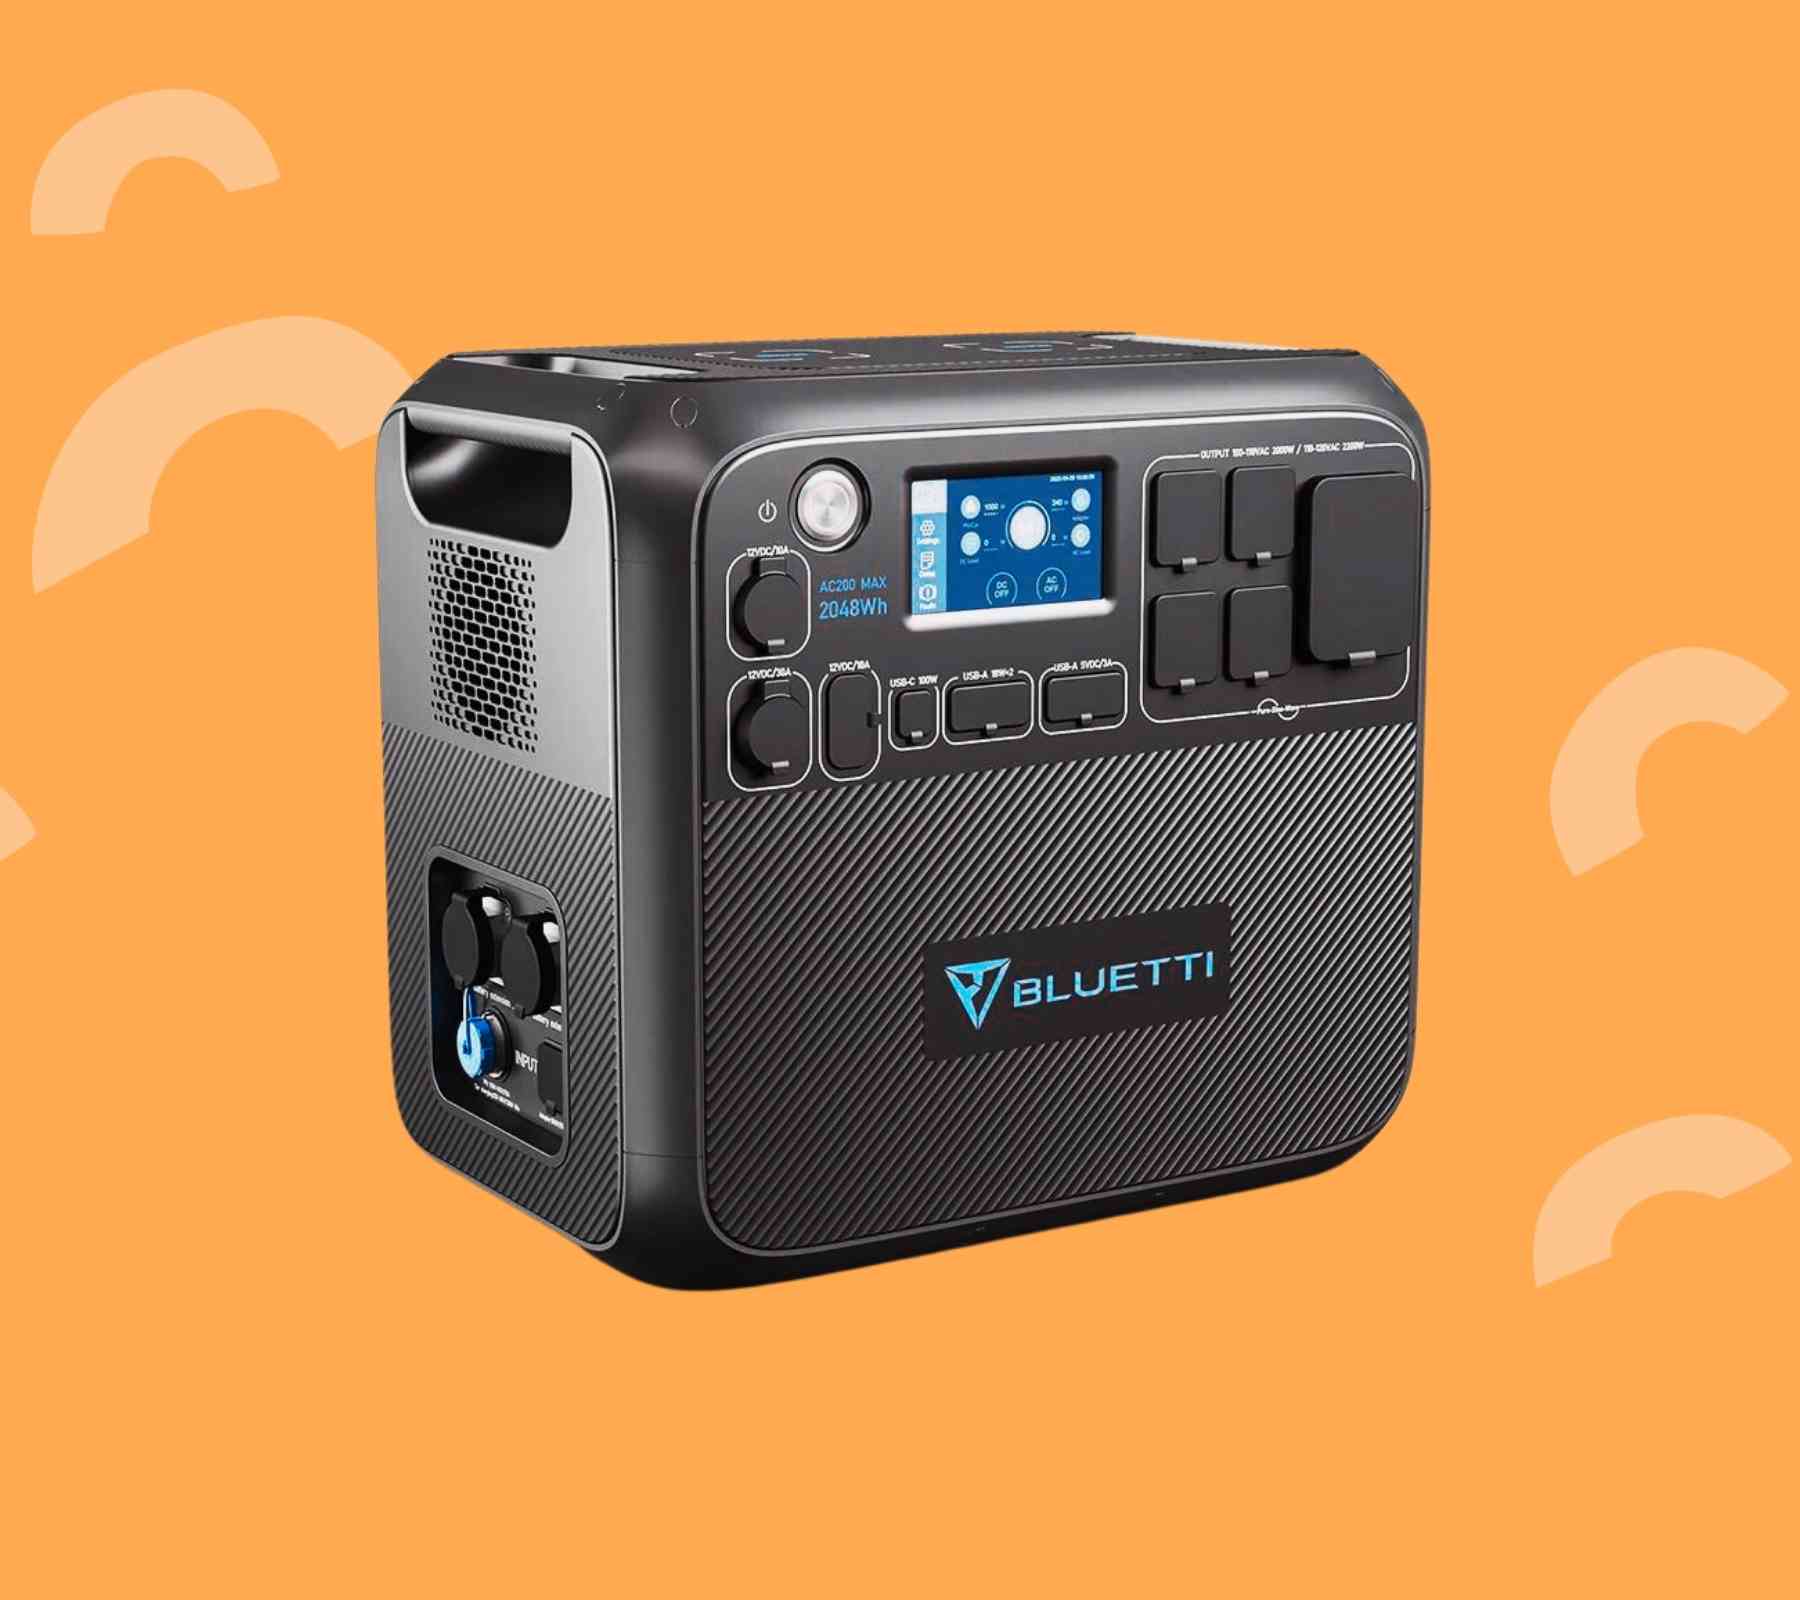 BLUETTI AC180 Review: Fast-Charging Power Station for Outdoor Adventures